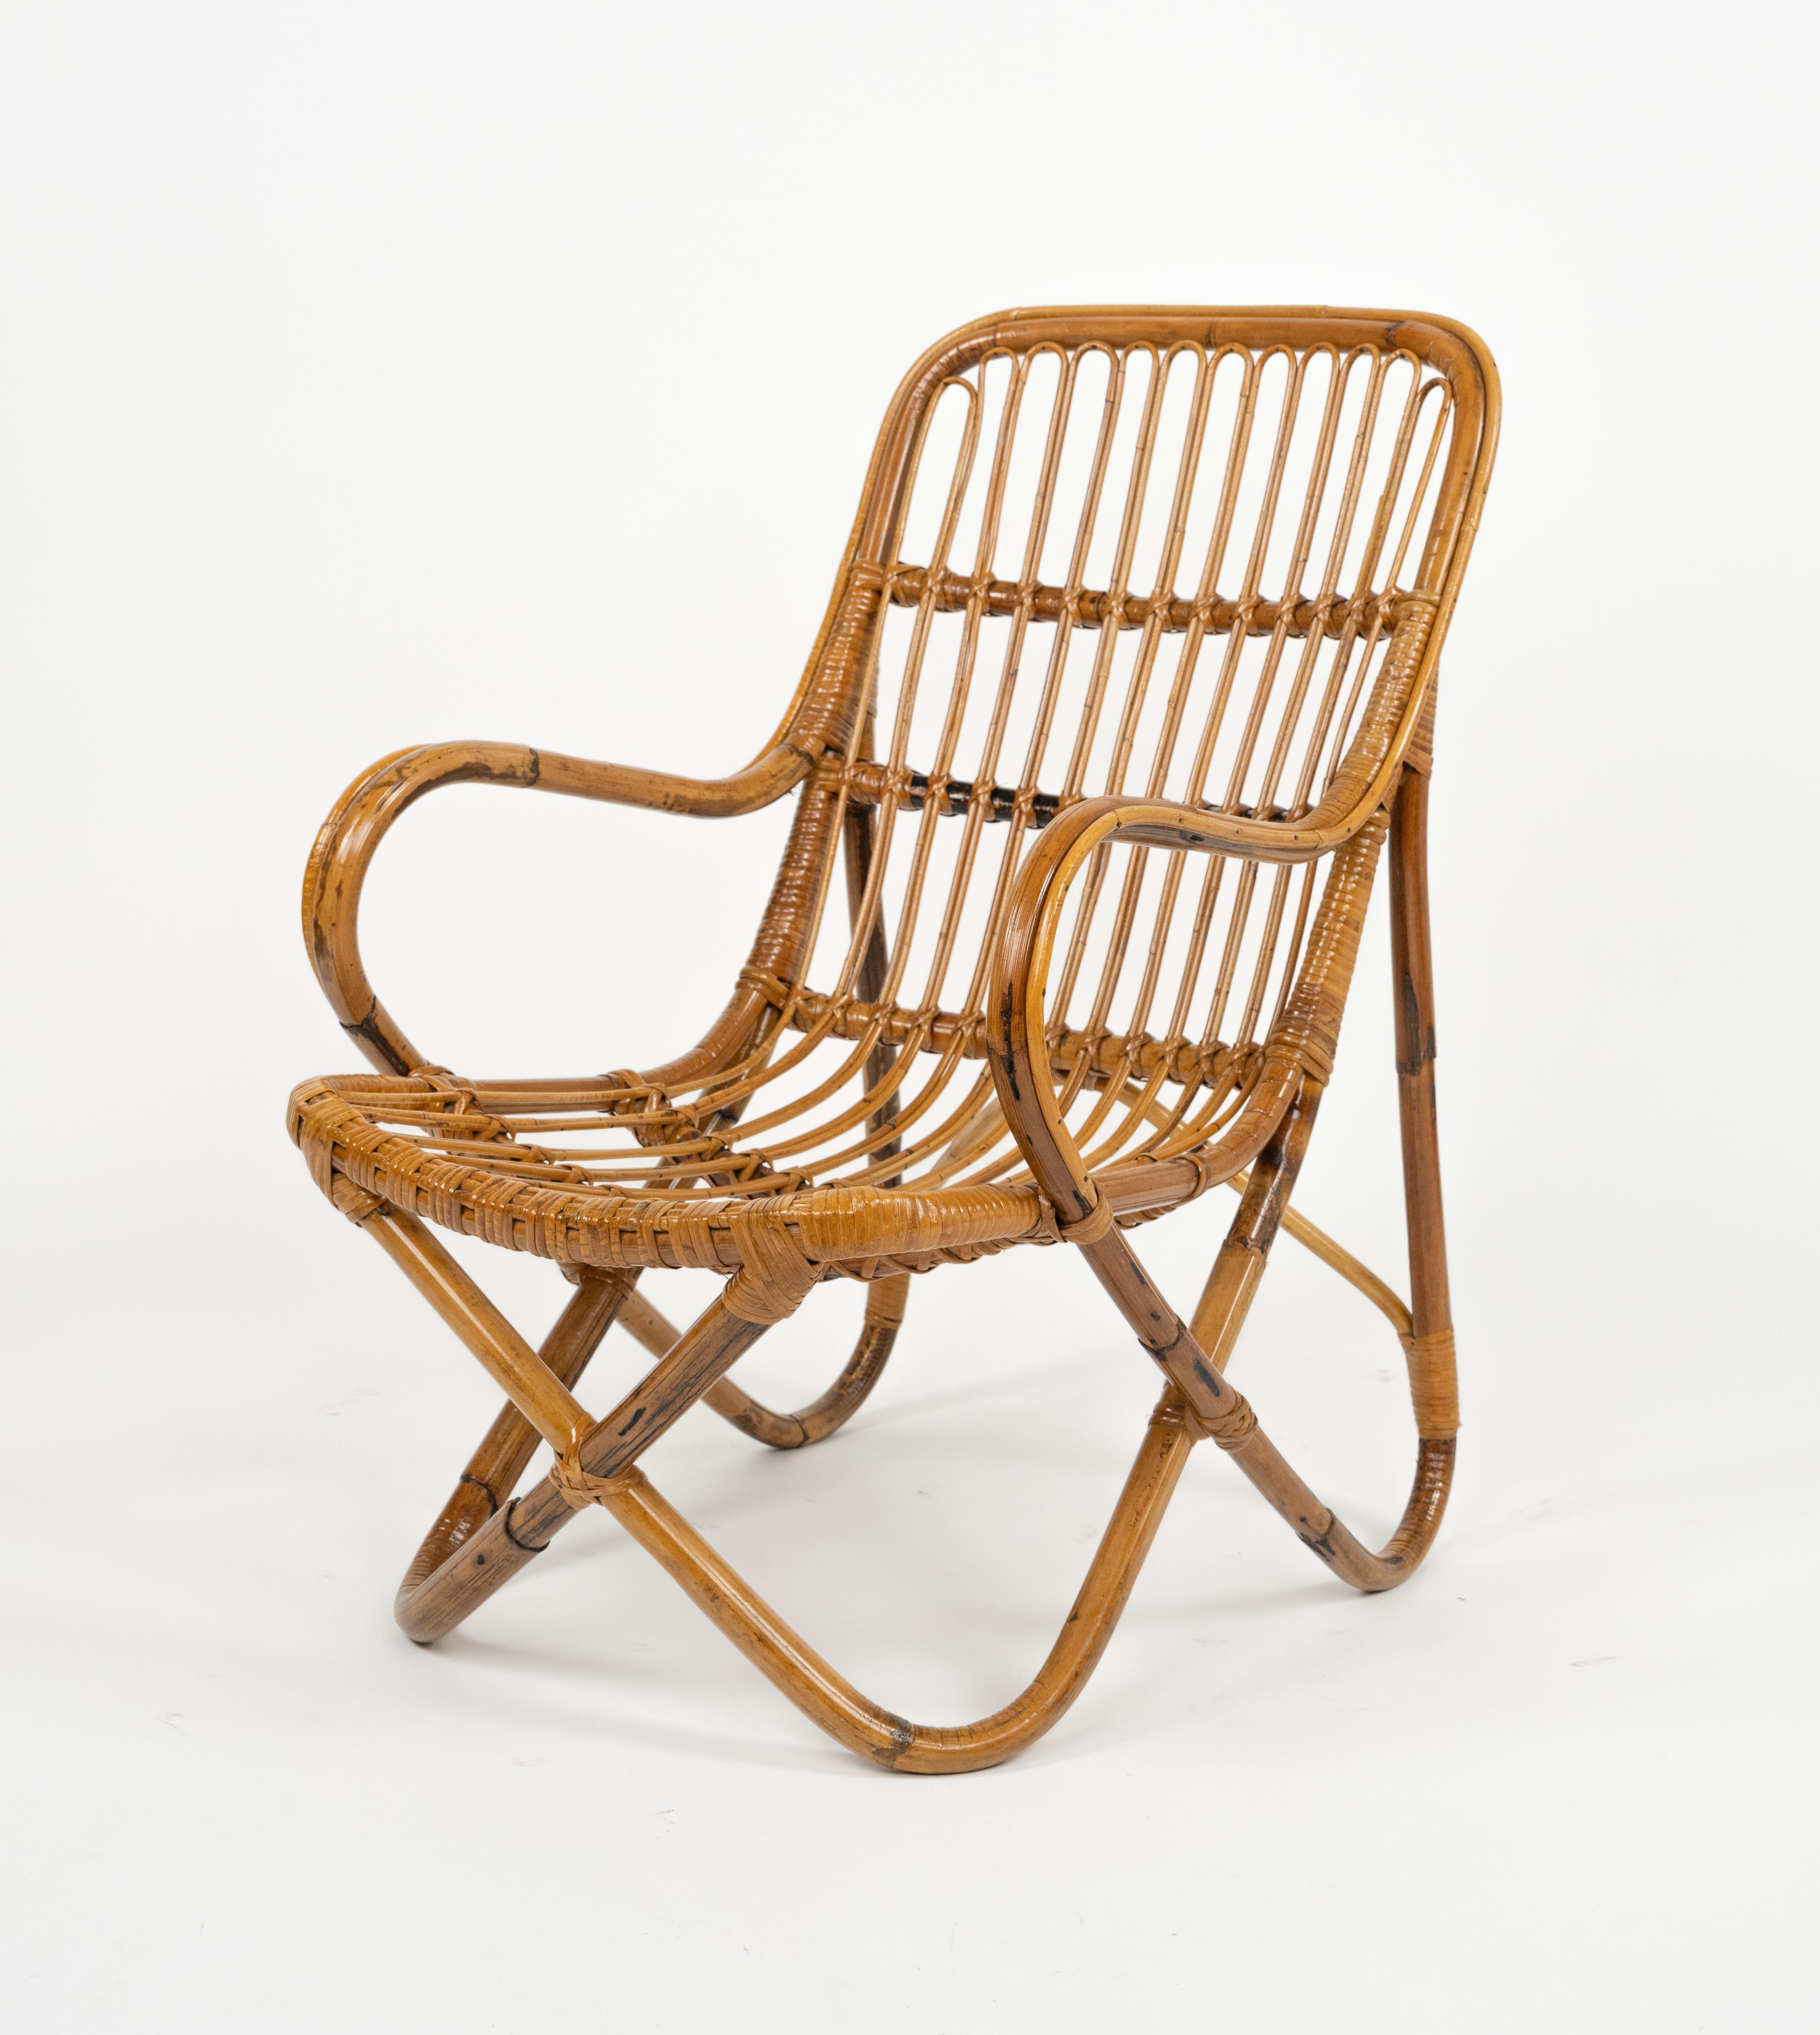 Midcentury Bamboo and Rattan Pair of Armchairs Tito Agnoli Style, Italy 1960s For Sale 7